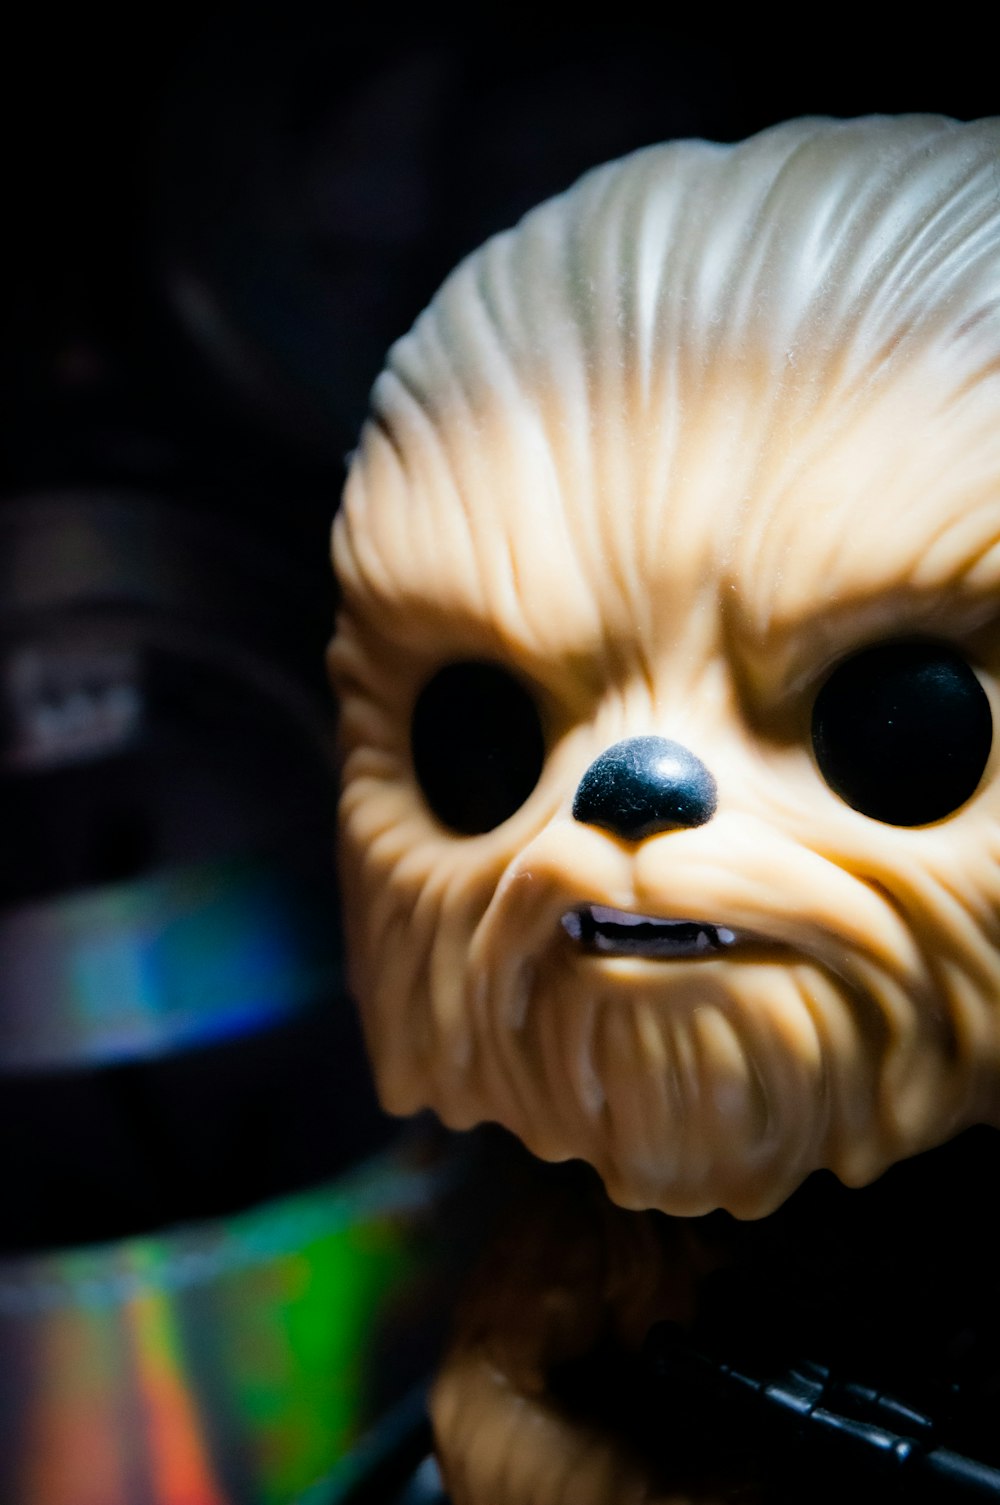 a close up of a toy with a blurry background